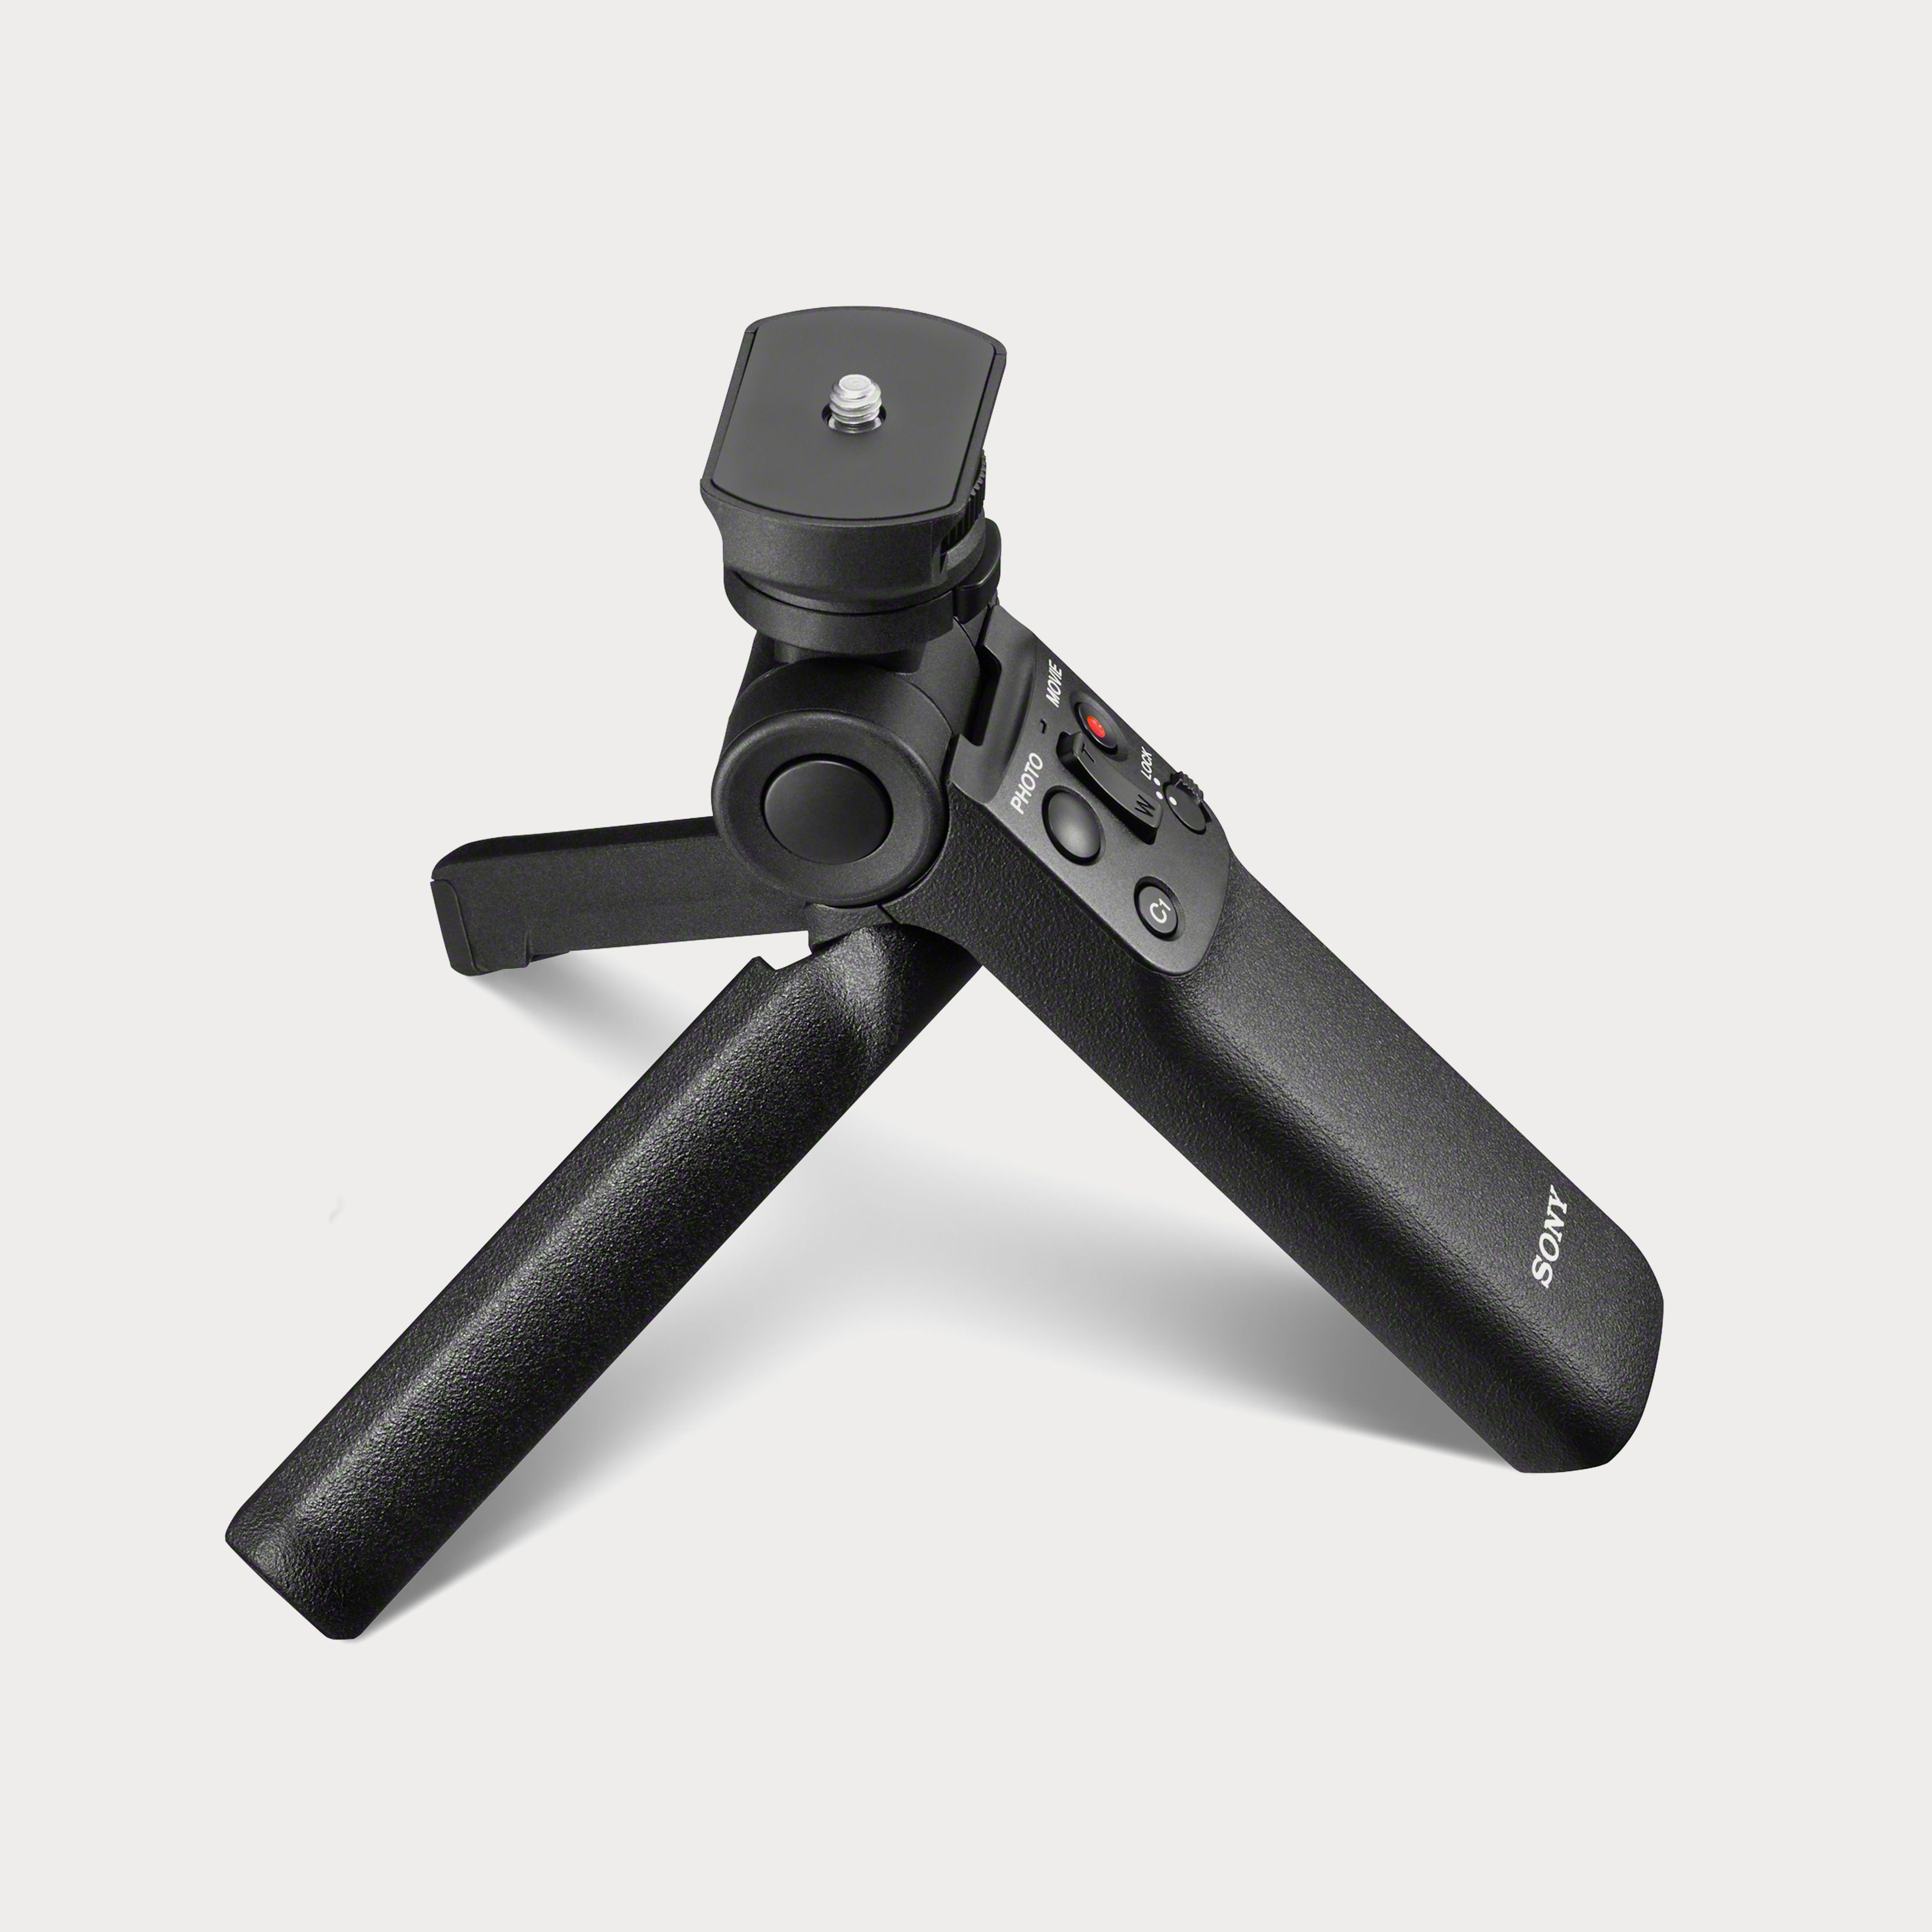 Sony Wireless Bluetooth Shooting Grip and Tripod GPVPT2BT - Black